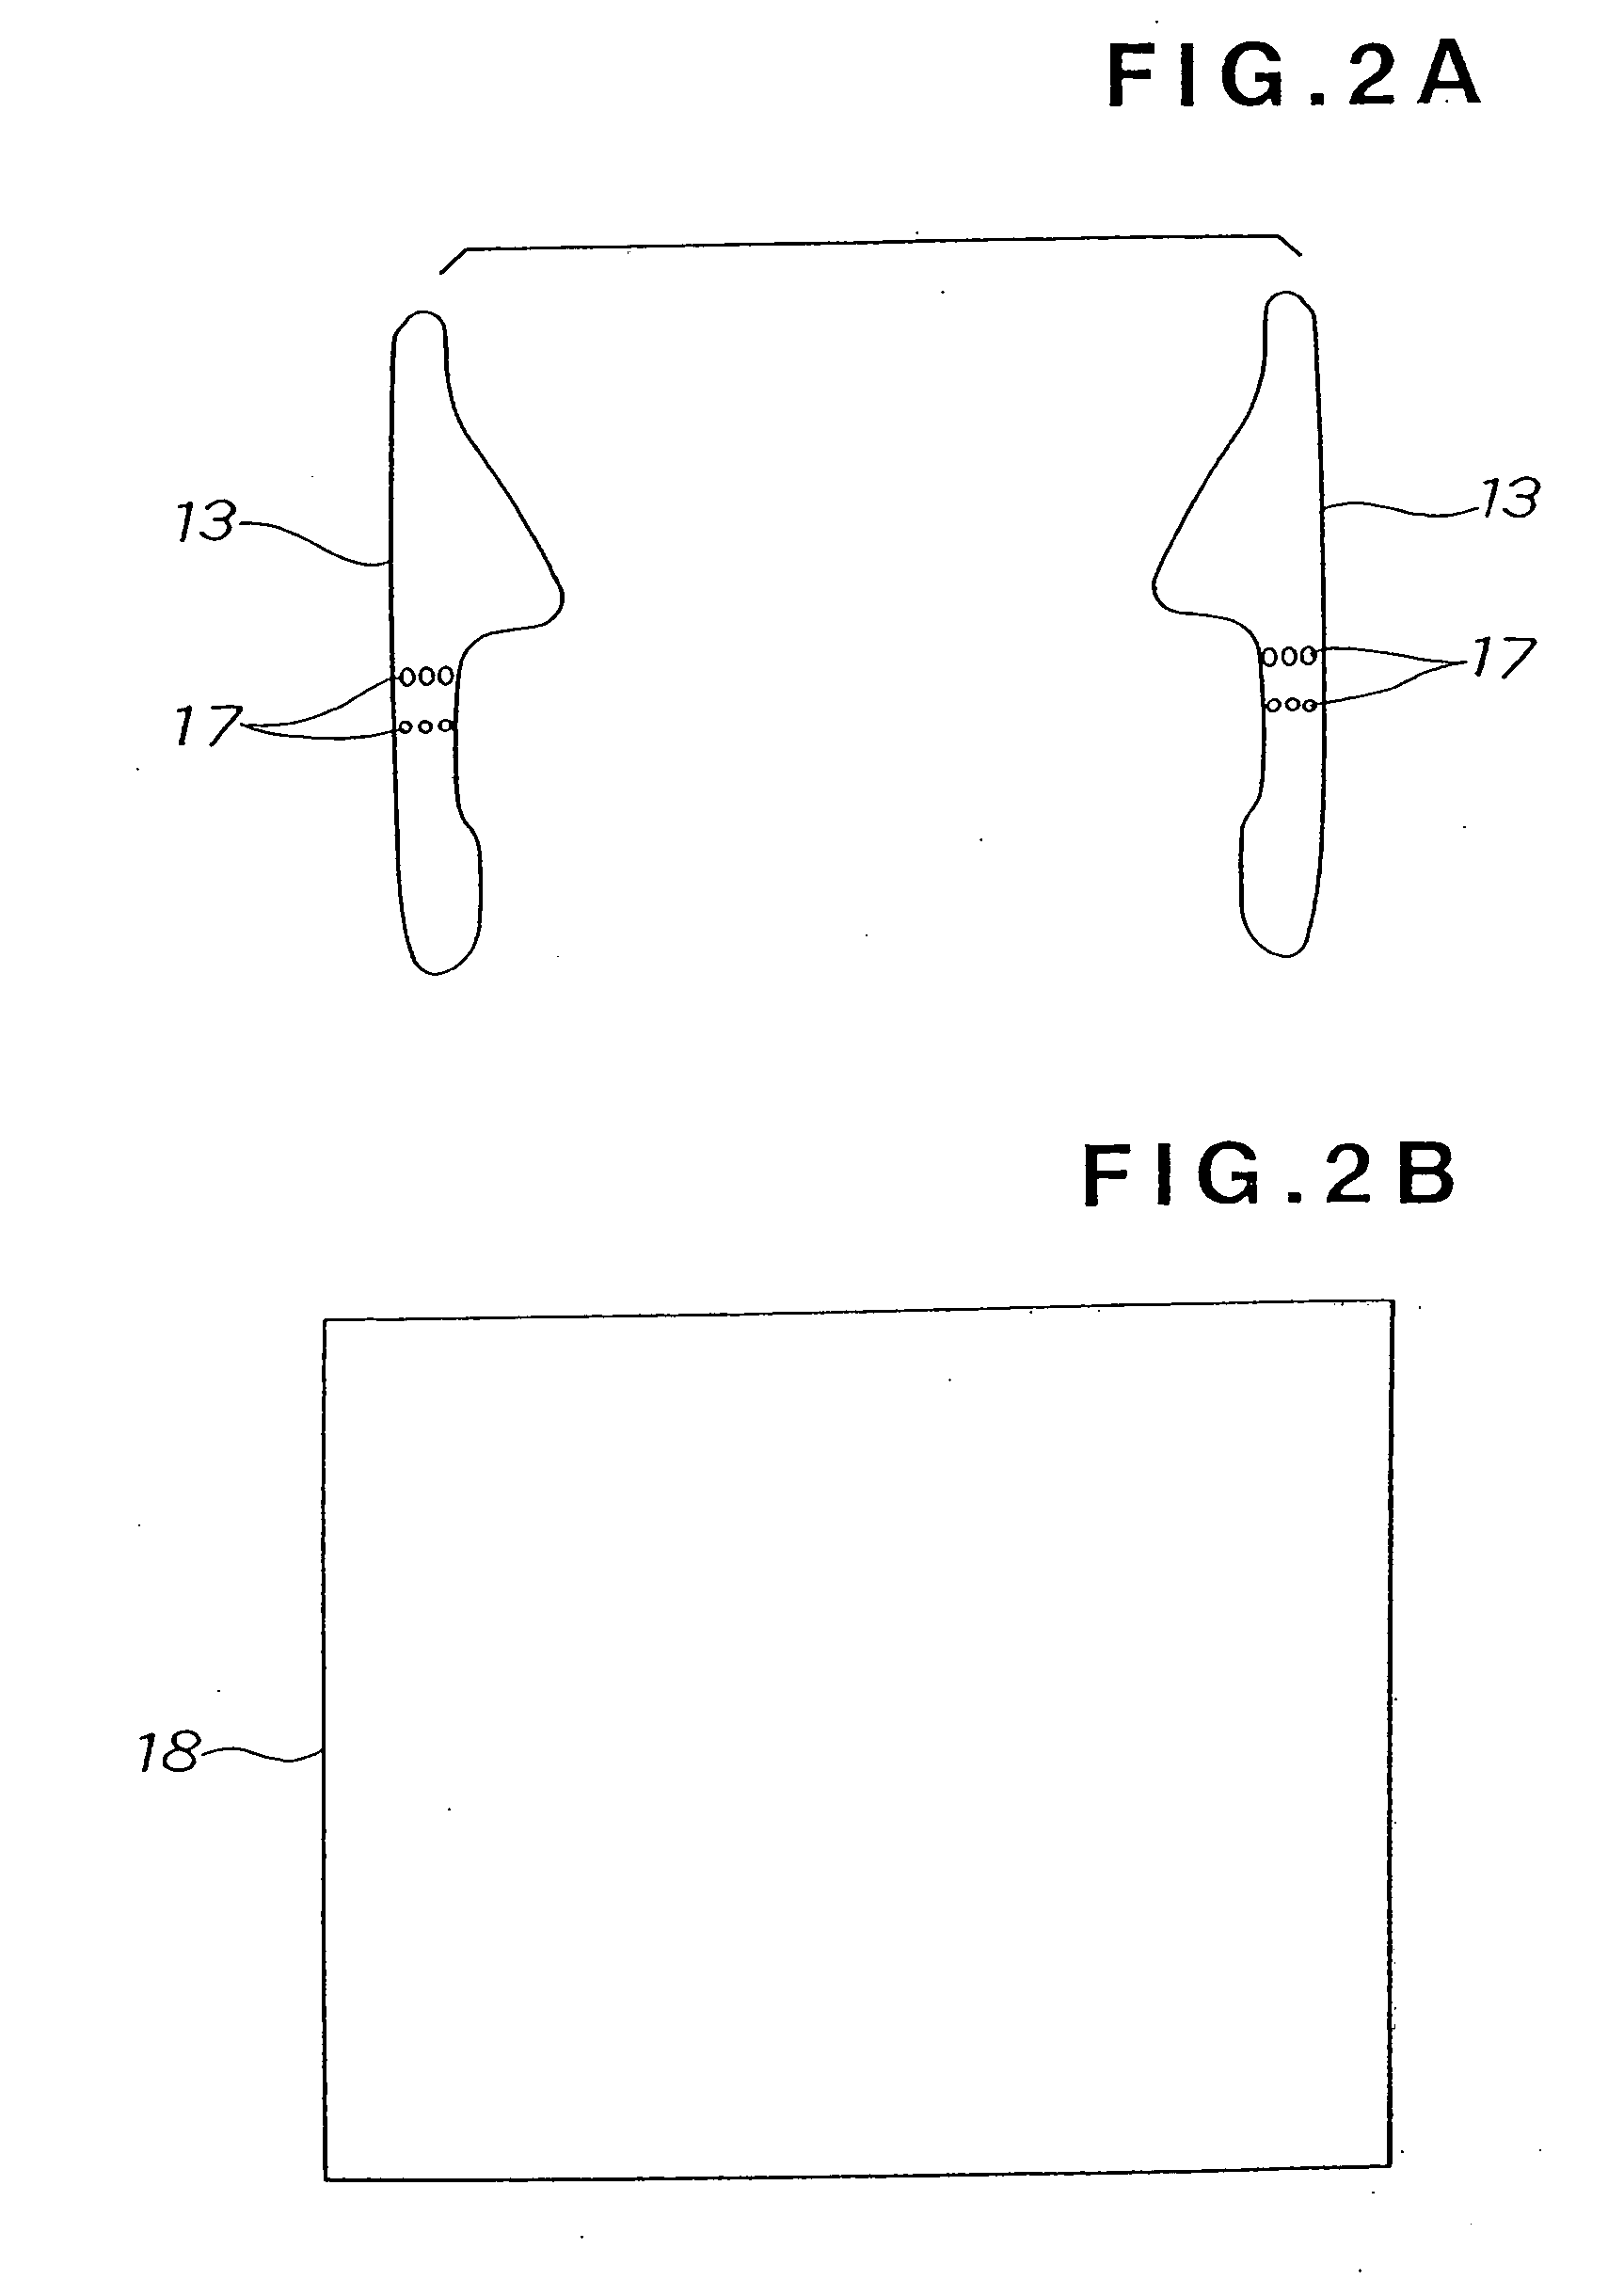 Vehicular body panel or component part and method for manufacturing same